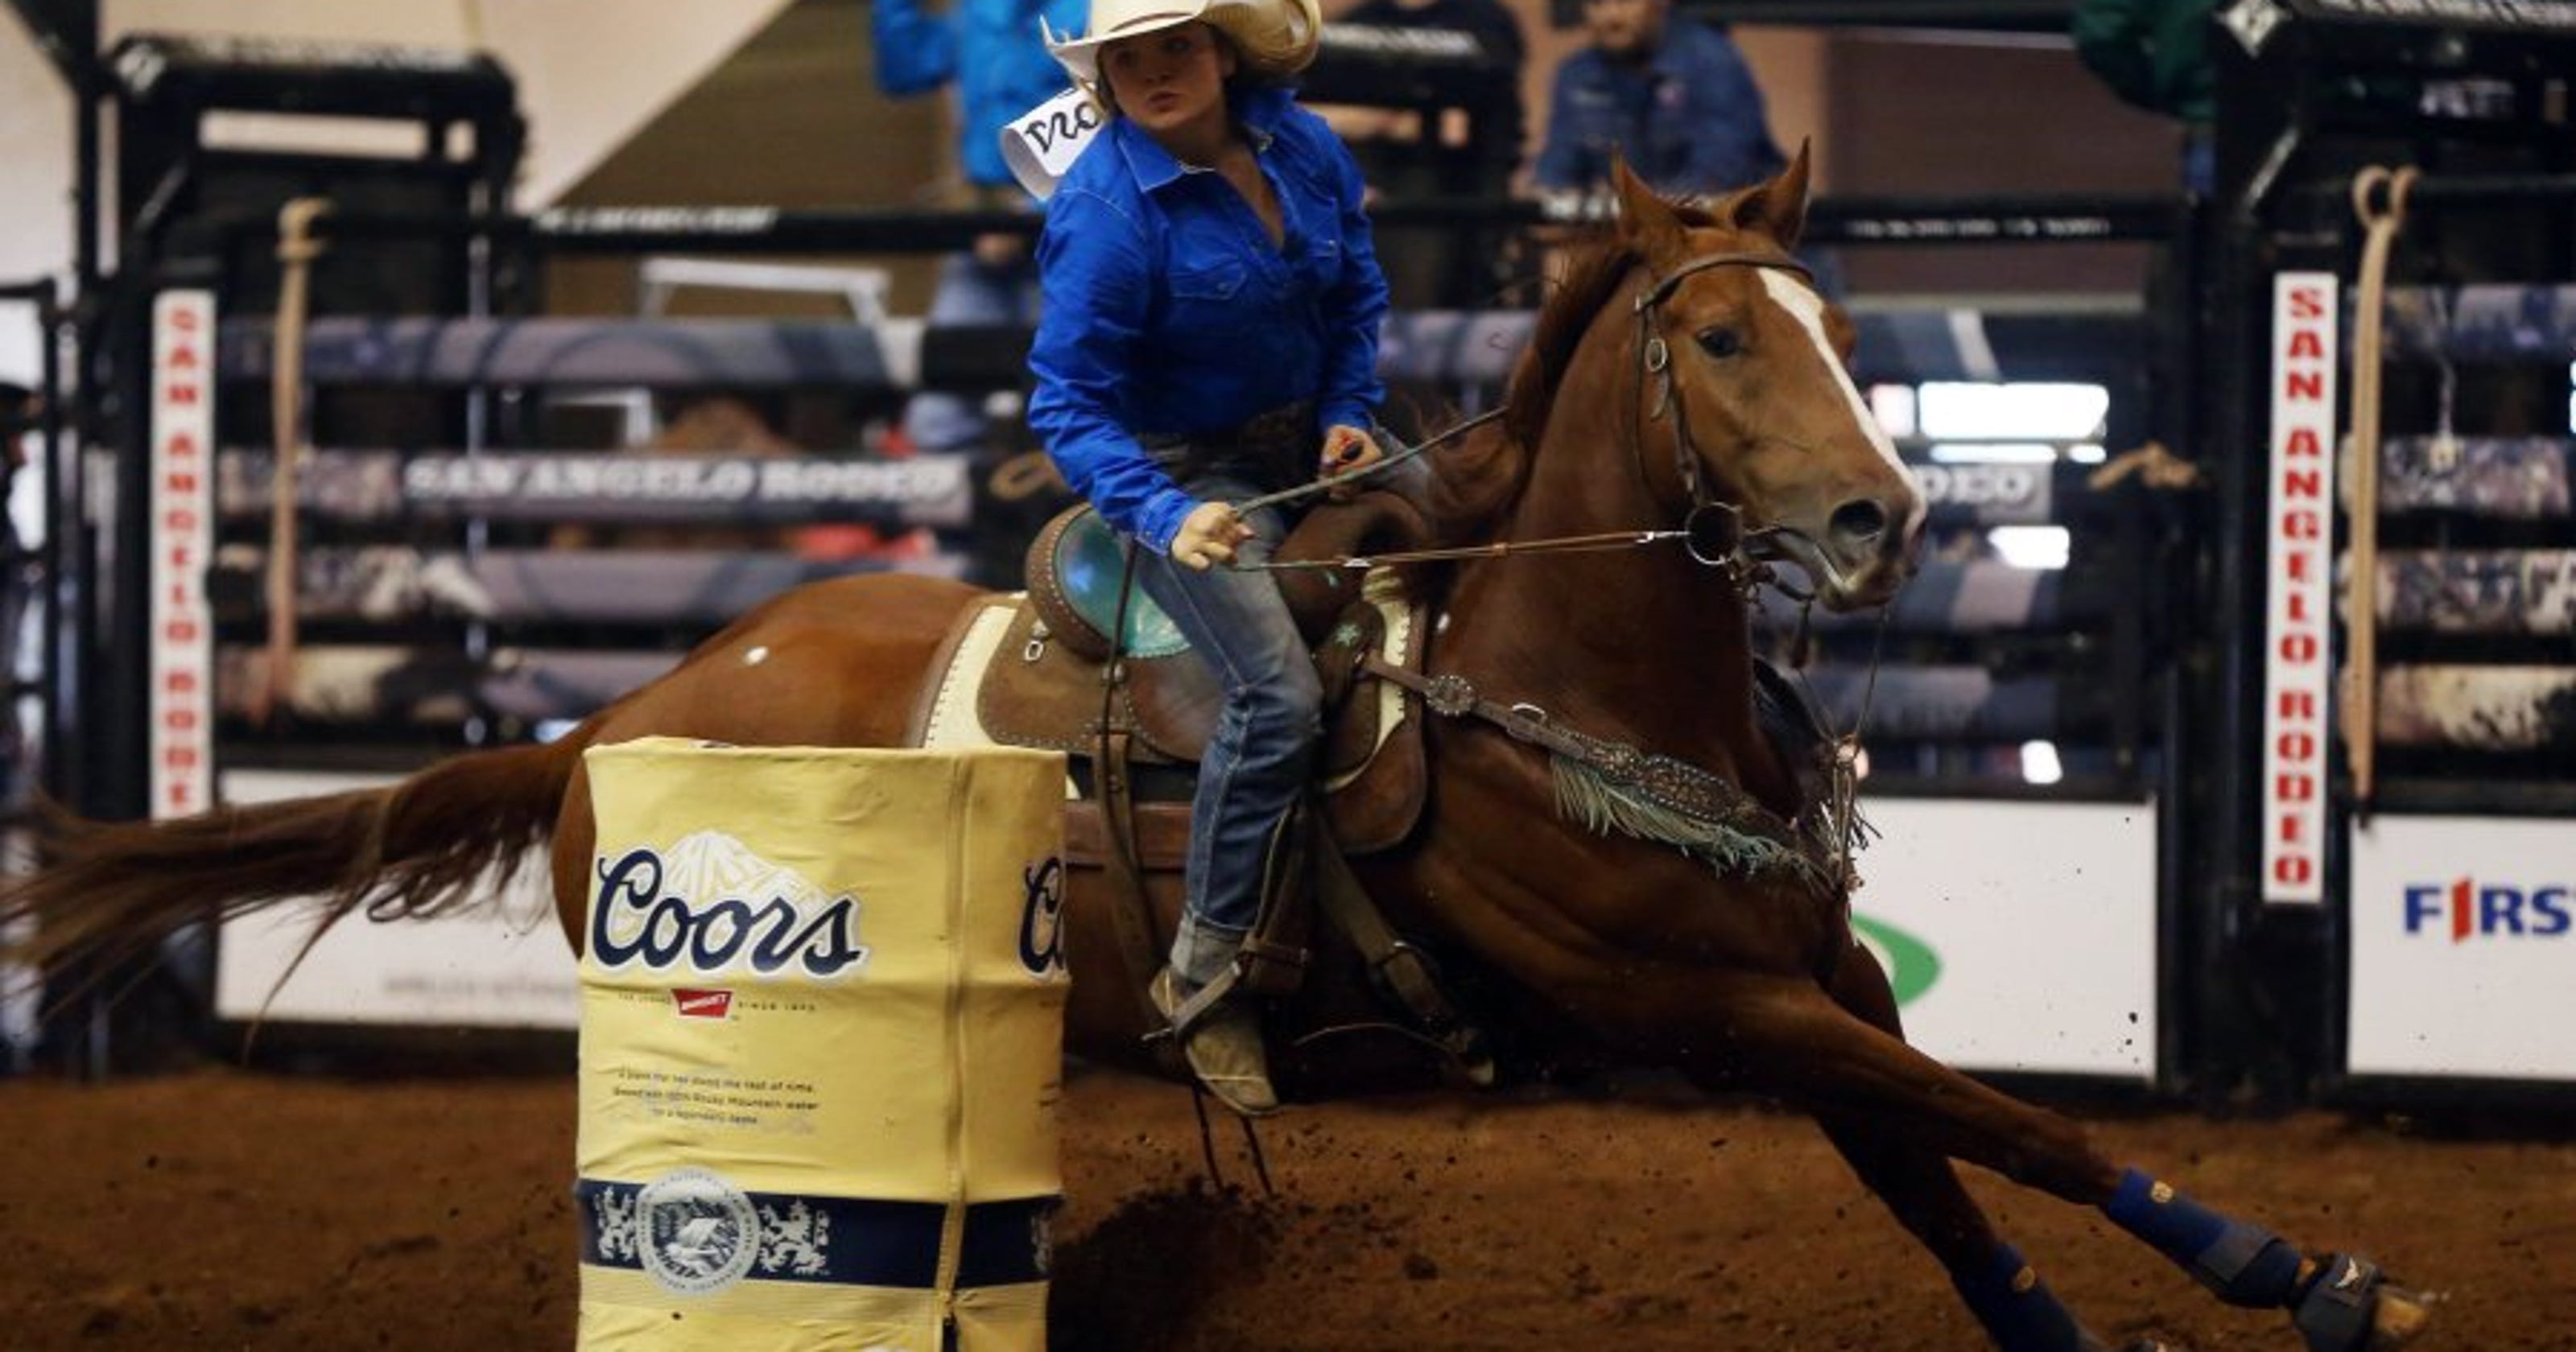 PRCA Rodeo results